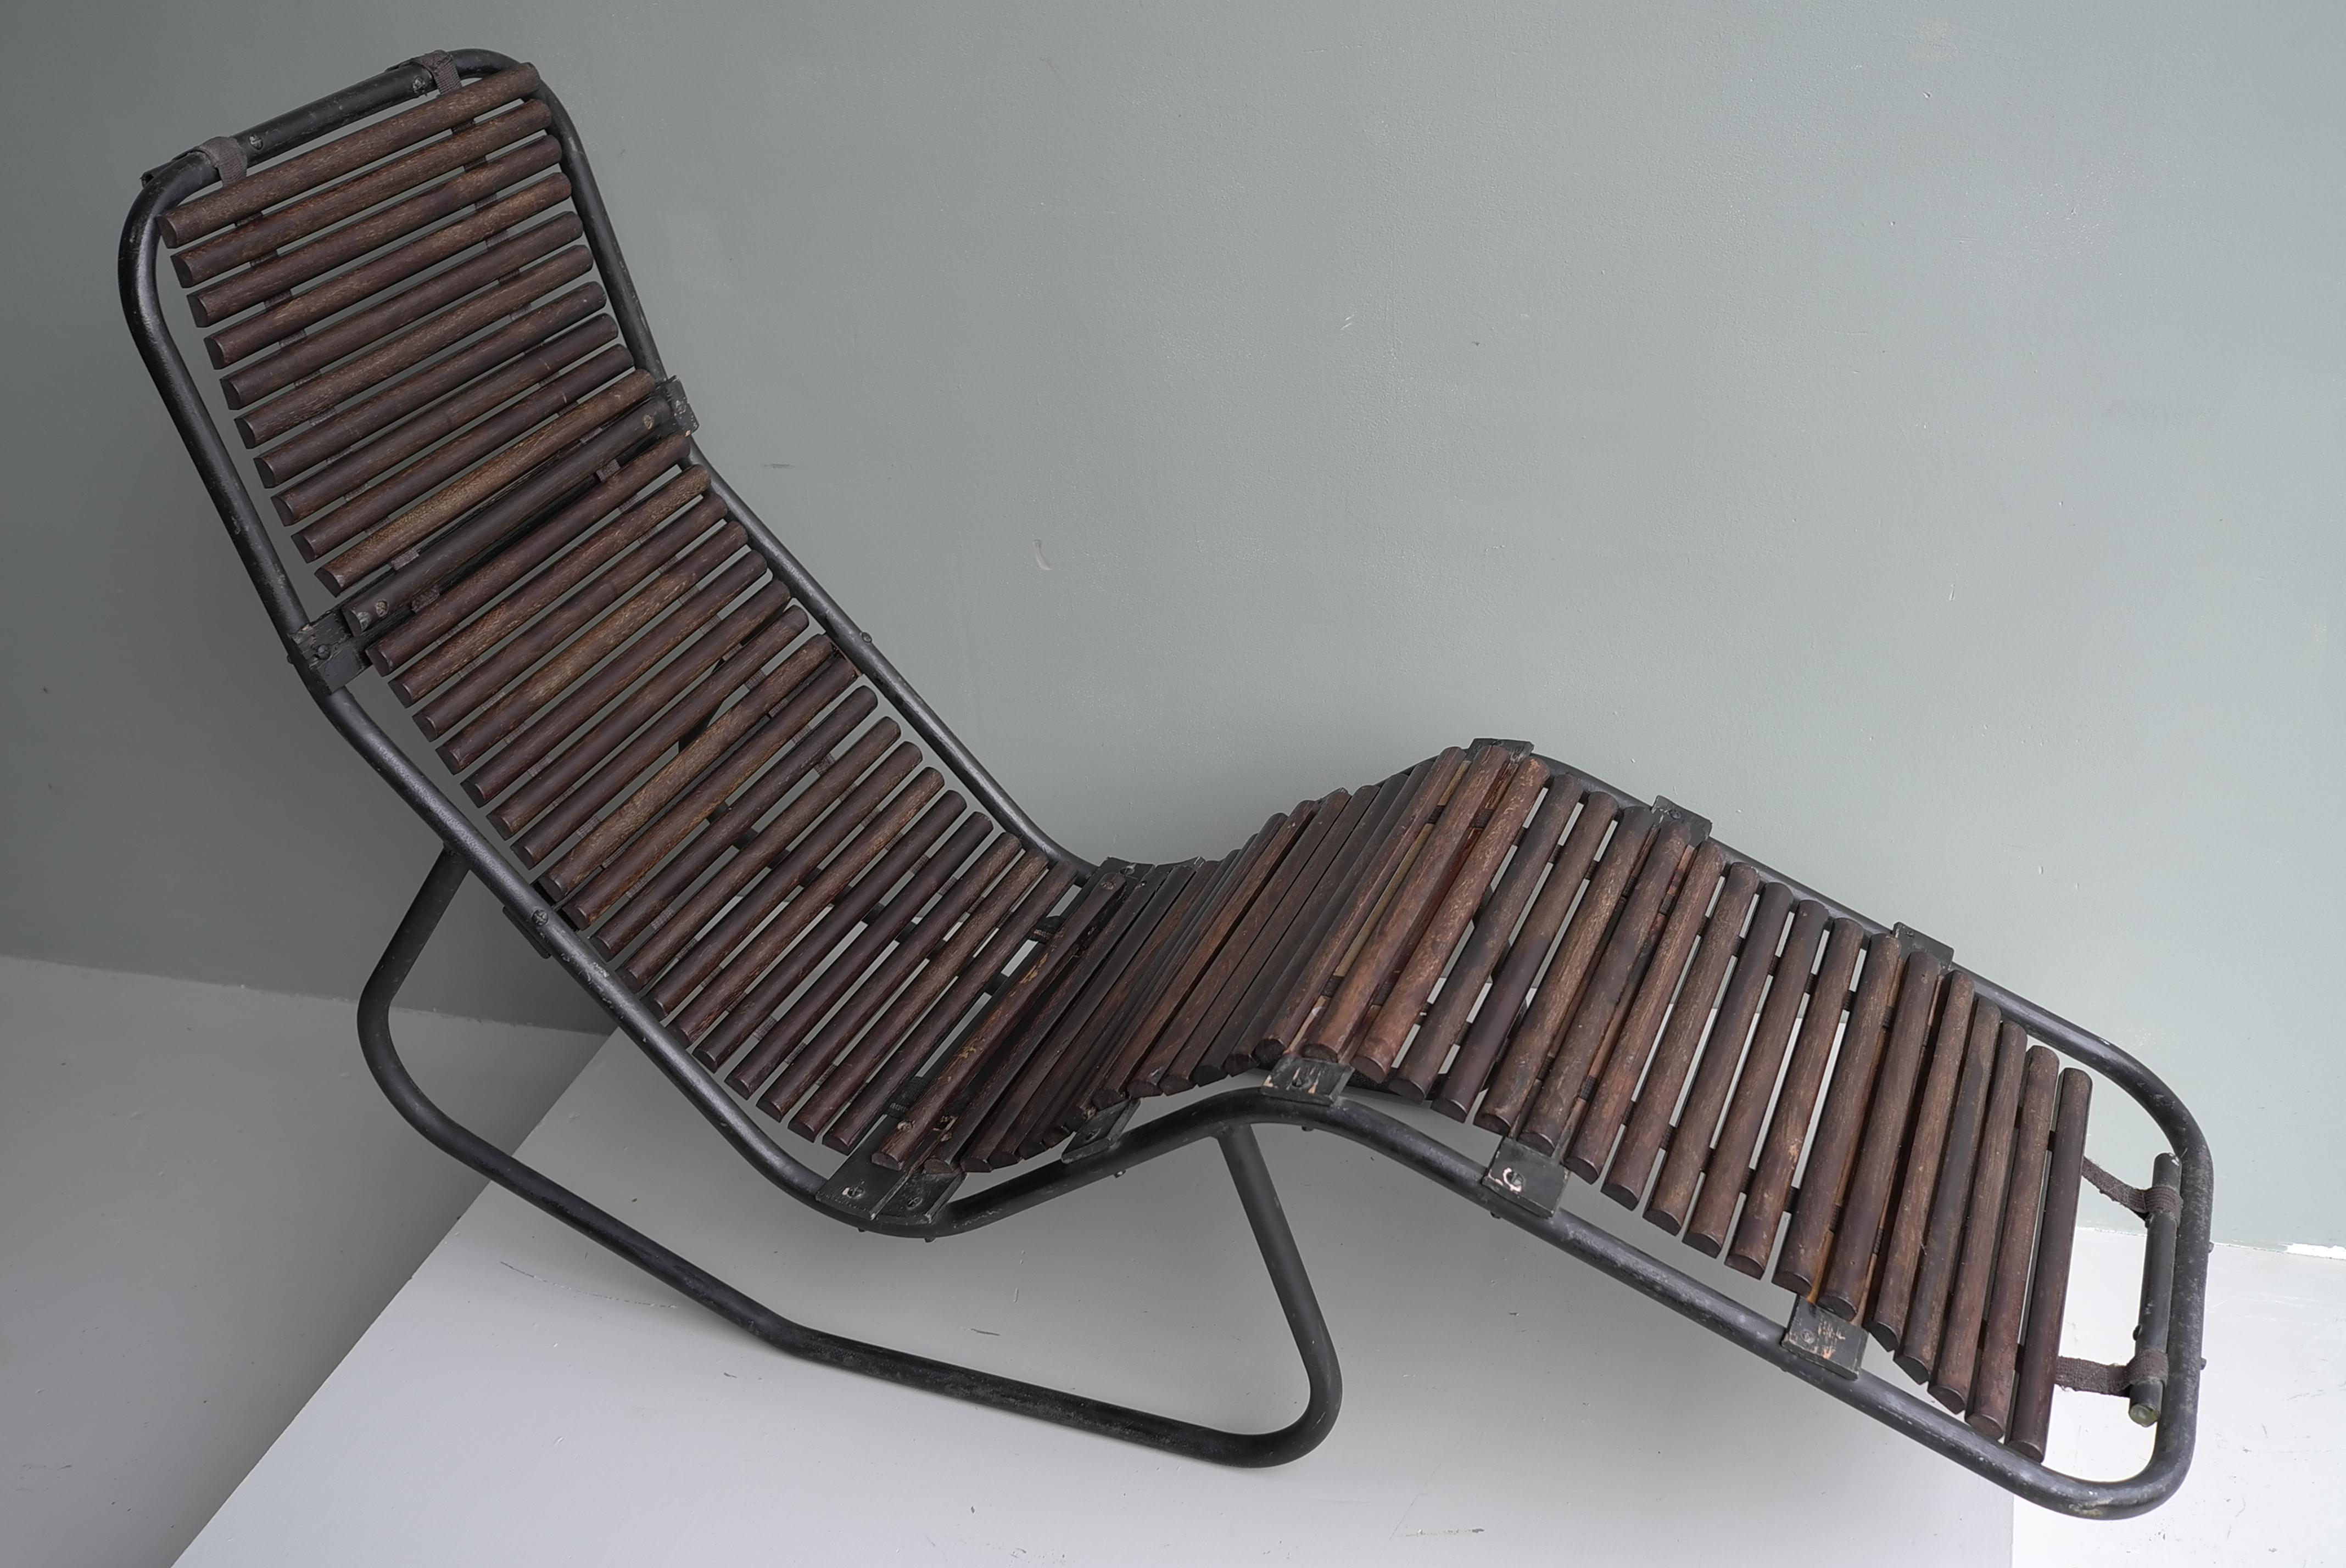 Tubular steel and hardwood Chaise longue ,France 1940's.

This unique lounge chair has a normal and recline position.